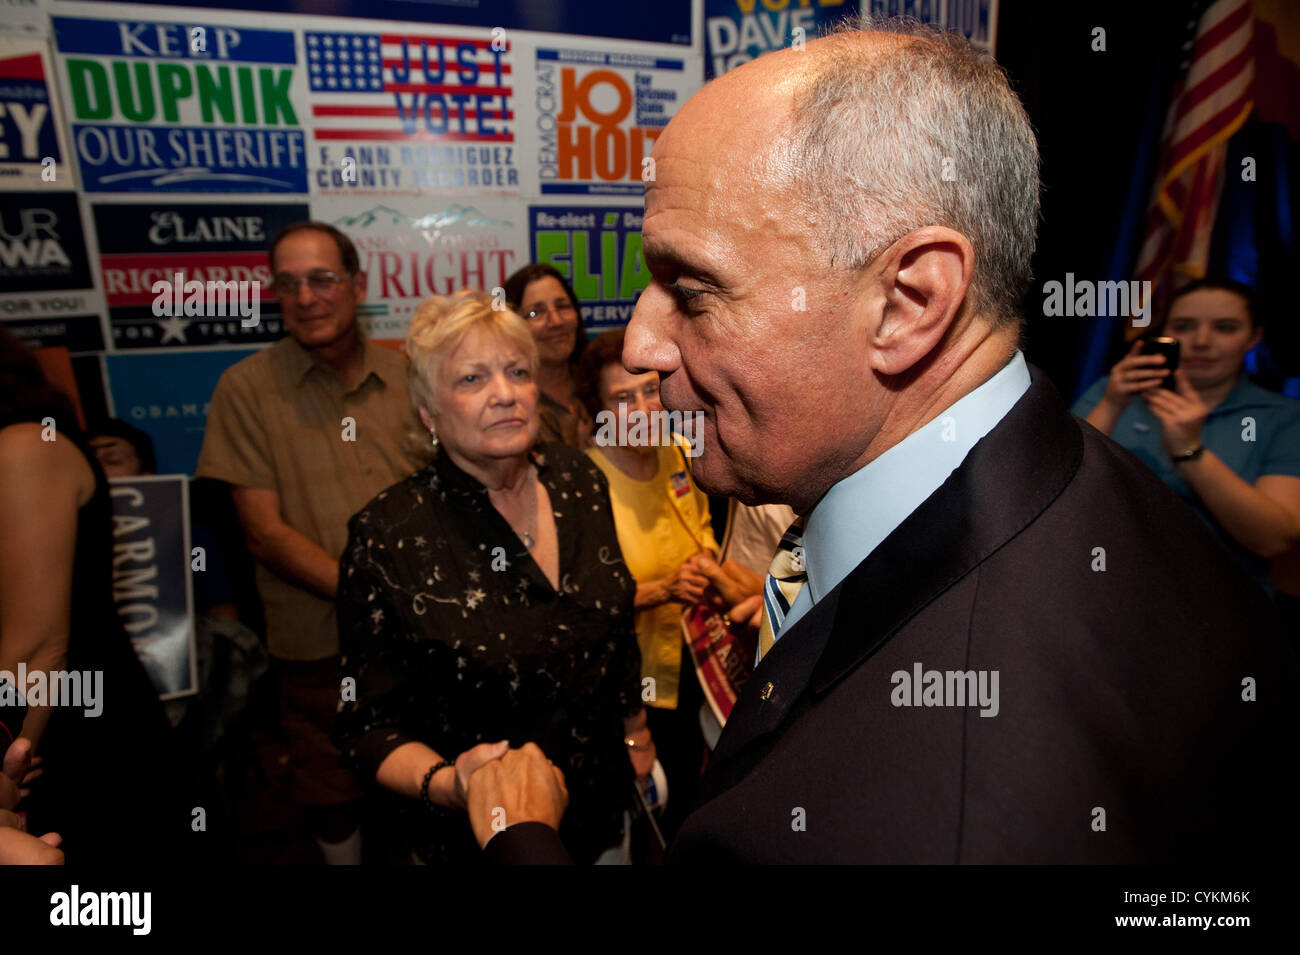 Nov. 6, 2012 - Tucson, Arizona, U.S - RICHARD CARMONA, the Democratic Senate candidate for Arizona's open seat, conceded victory to J. Flake at a Democratic election night party in Tucson, Ariz.  Carmona's somber speech focused on change in Arizona towards moderation in politics, and thanking staff and volunteers for their hard work. (Credit Image: © Will Seberger/ZUMAPRESS.com) Stock Photo